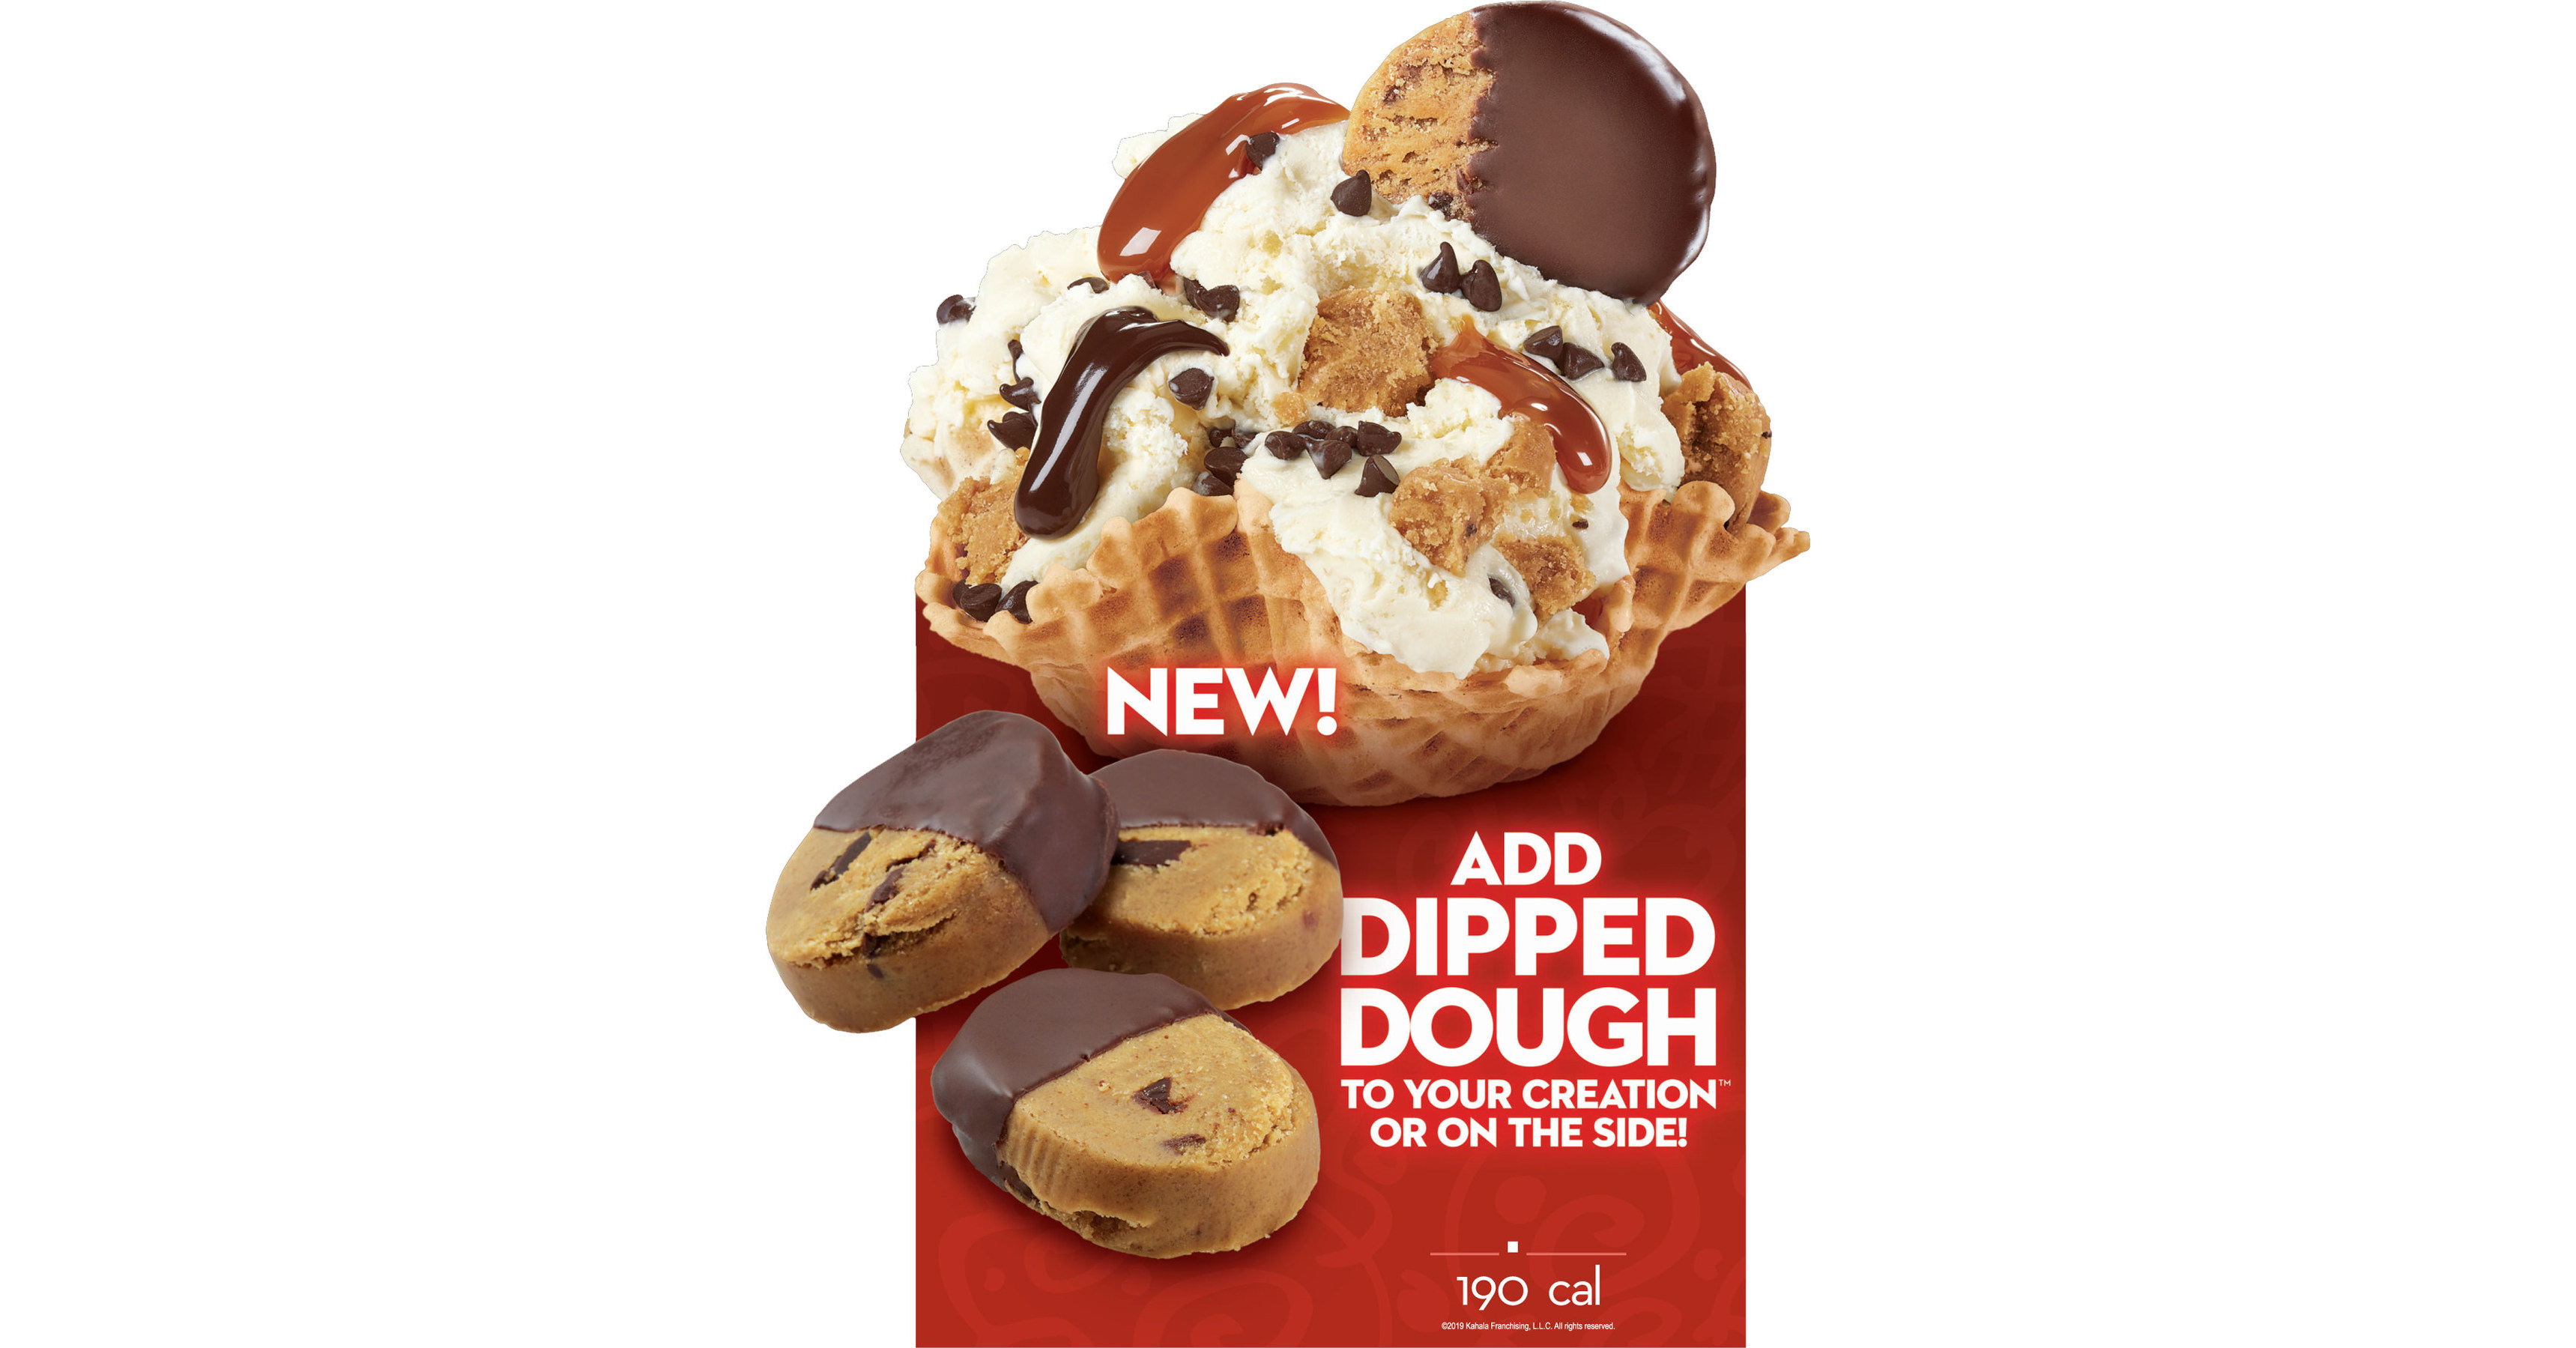 Classic Cookie Launches New Flavor!